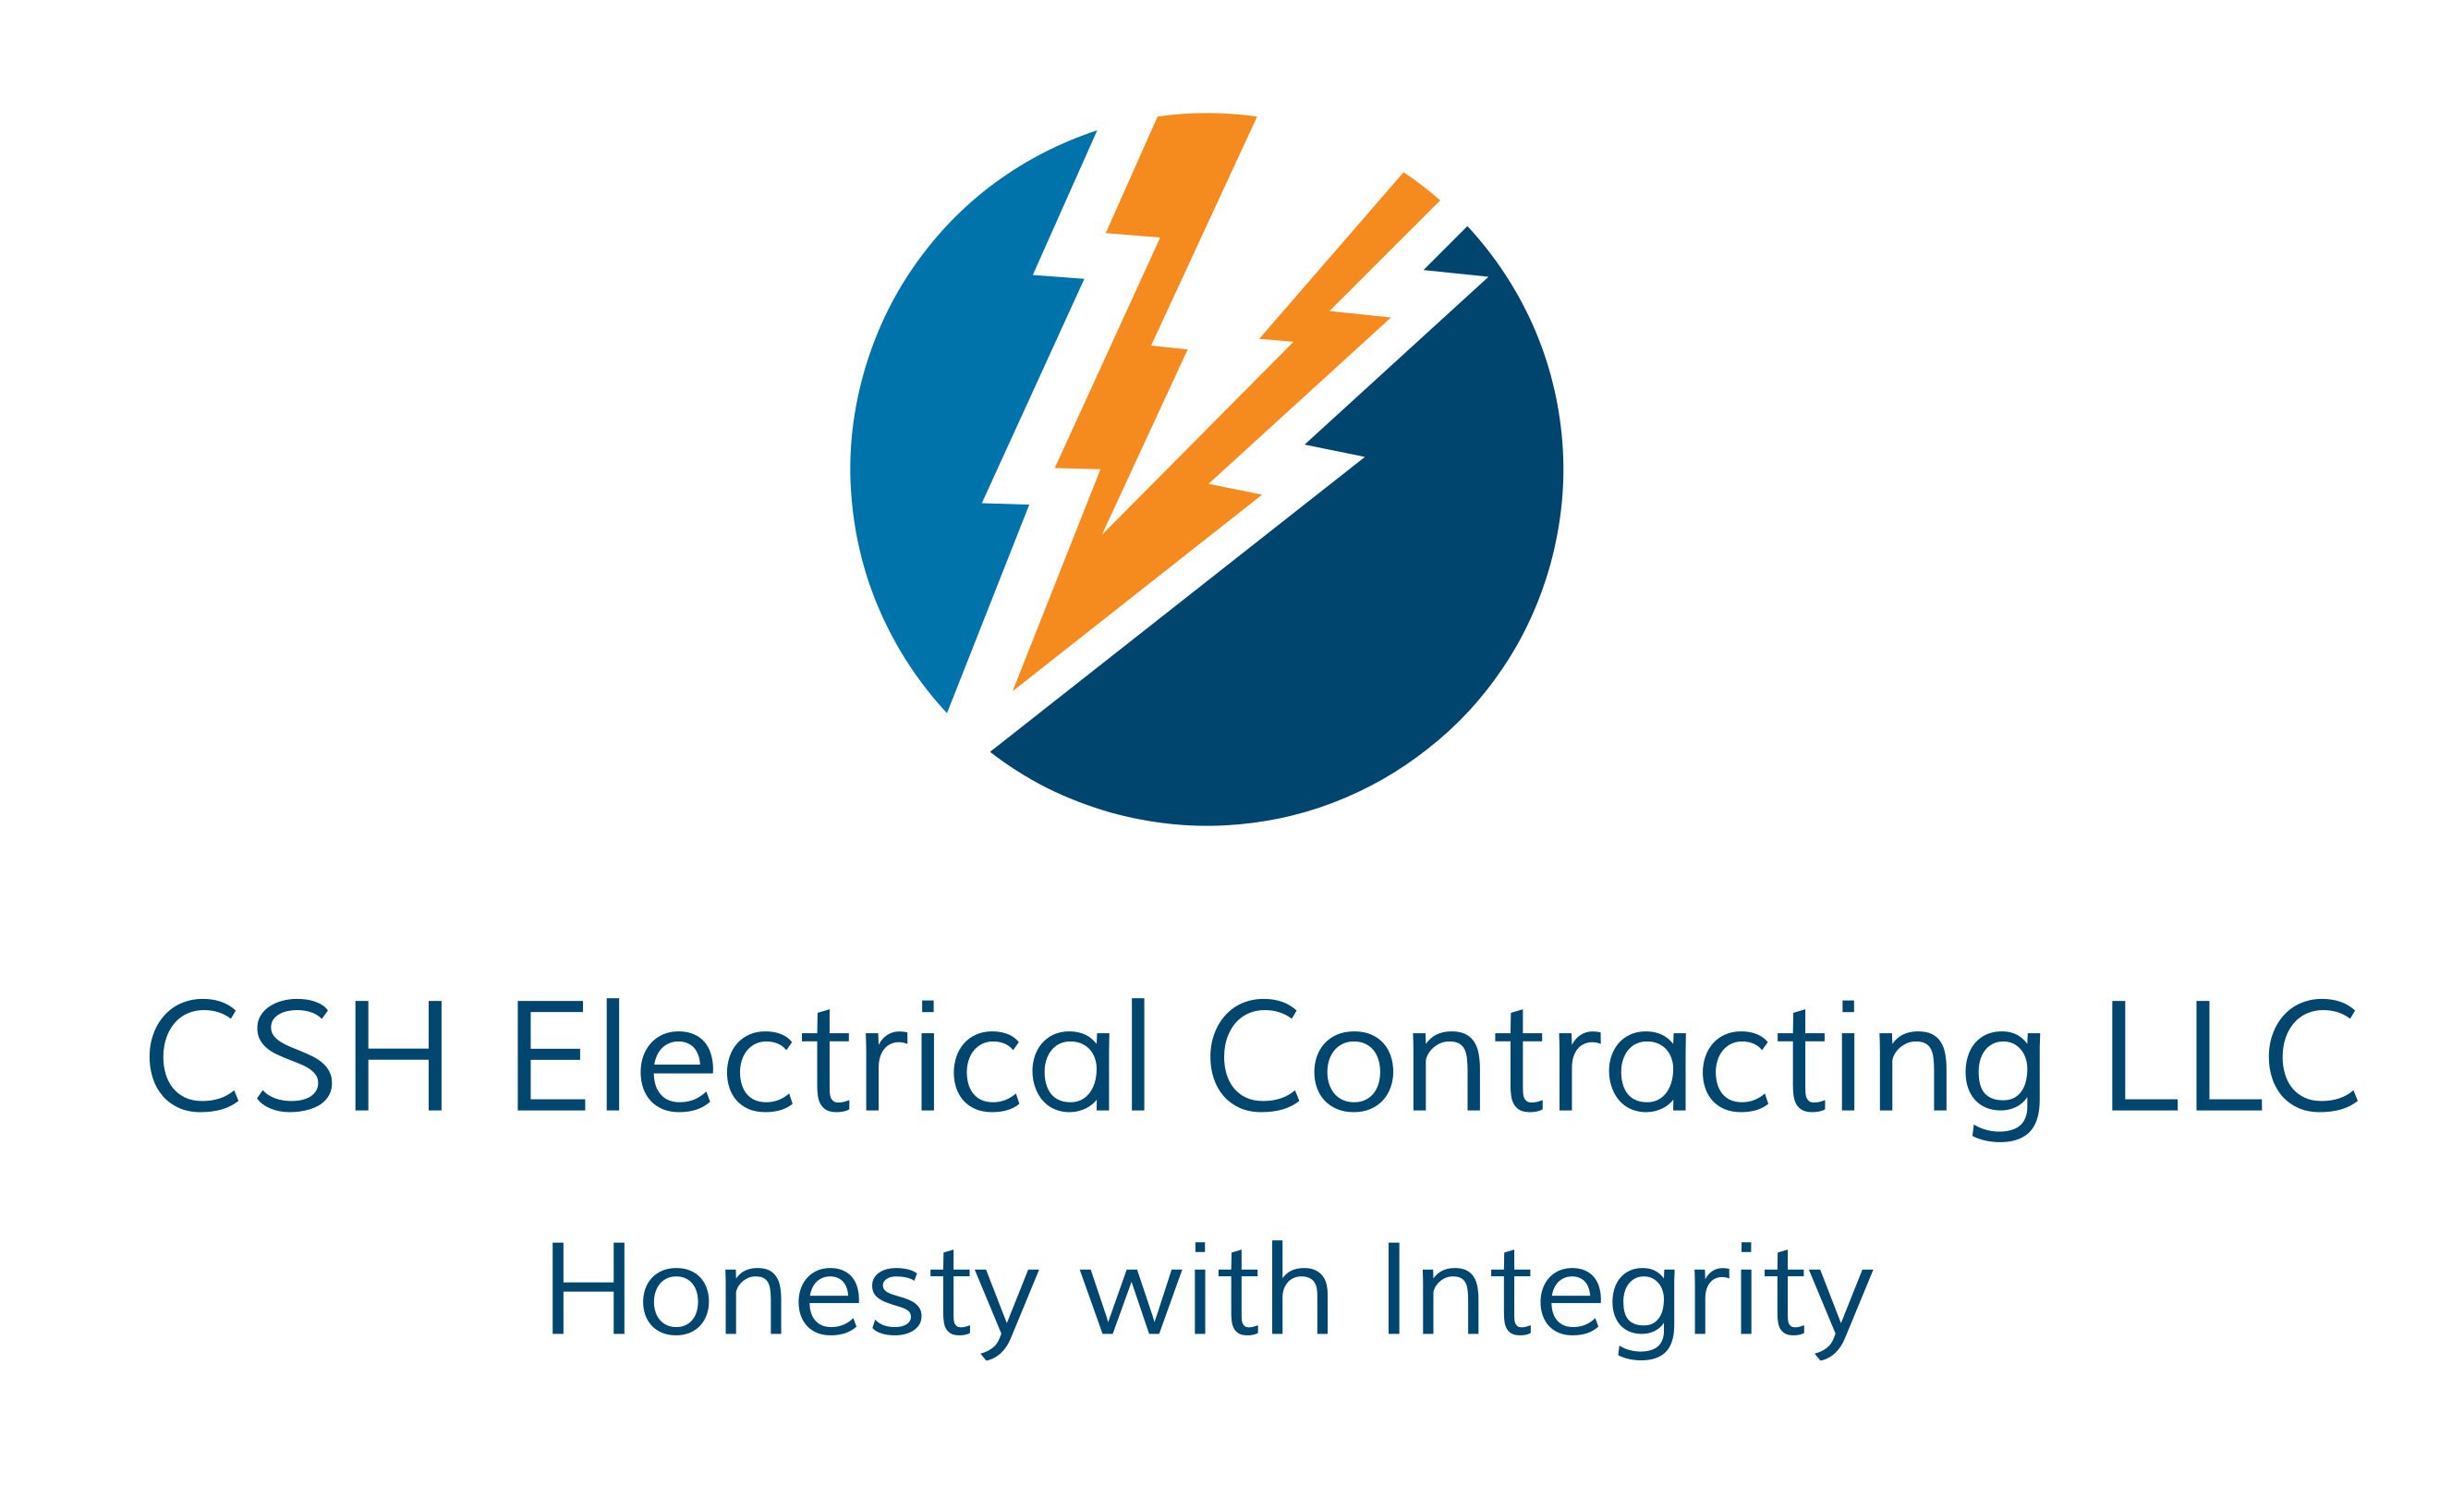 CSH ELECTRICAL CONTRACTING LLC